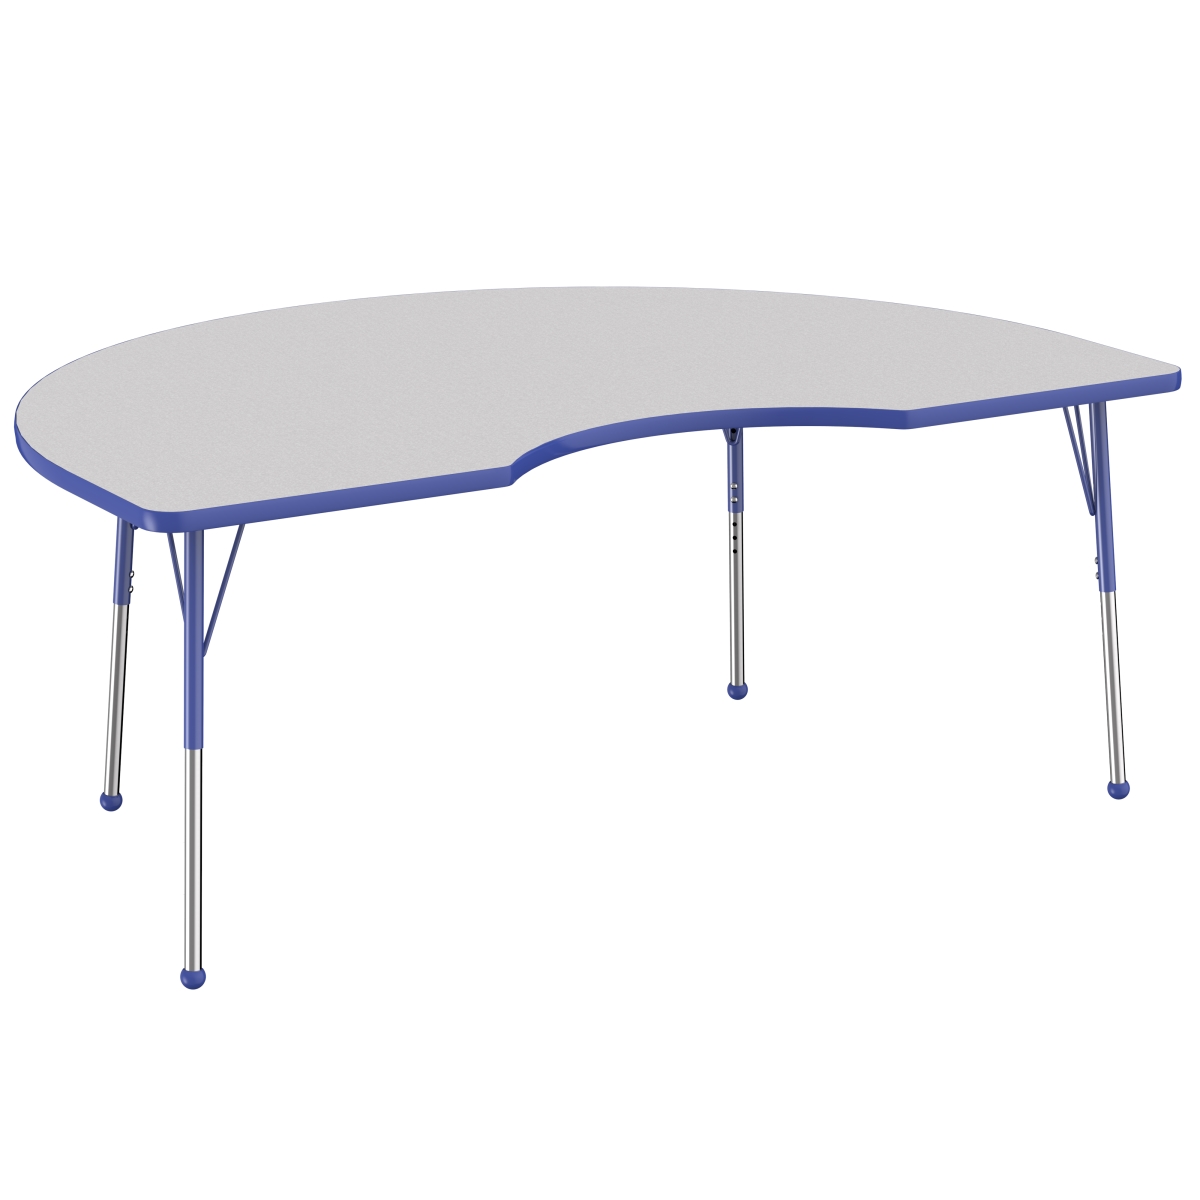 10086-gybl 48 X 72 In. Kidney T-mold Adjustable Activity Table With Standard Ball - Grey & Blue